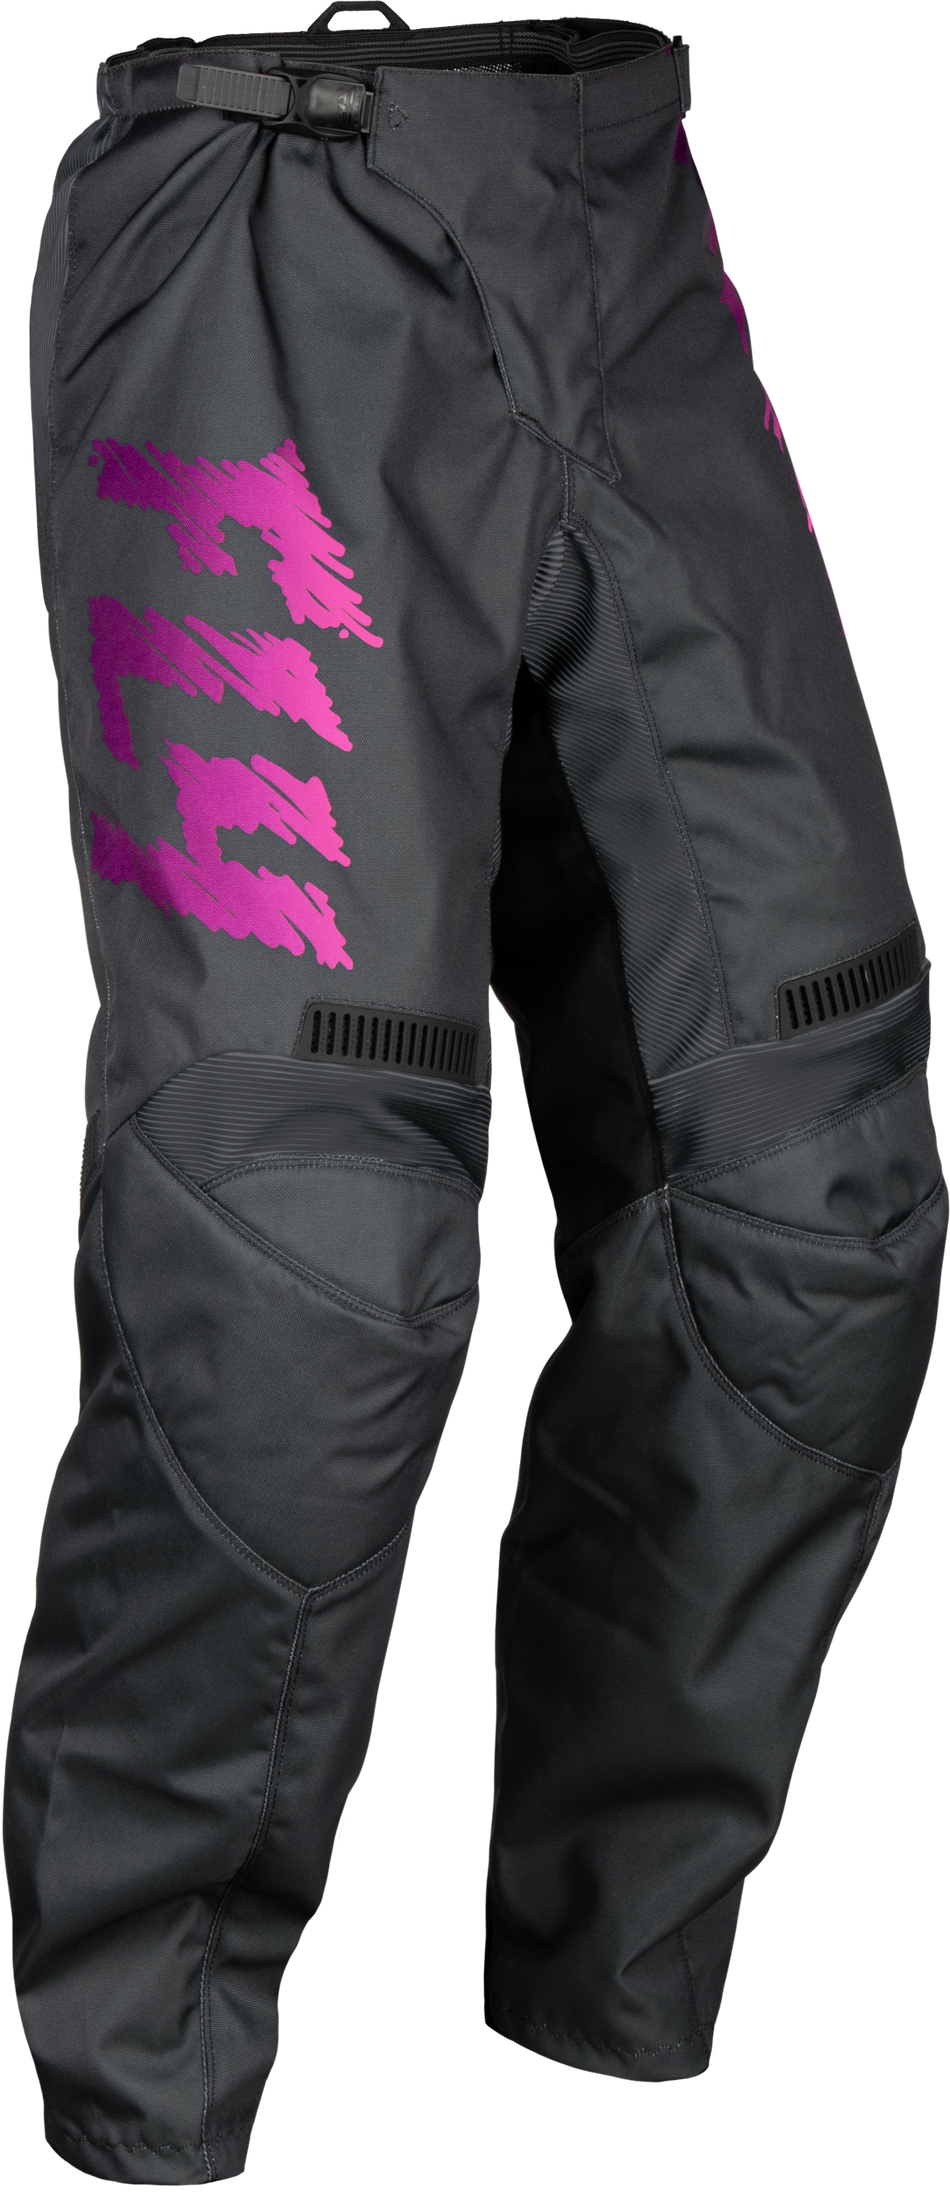 FLY RACING Youth F-16 Pants Grey/Charcoal/Pink Sz 18 377-23018